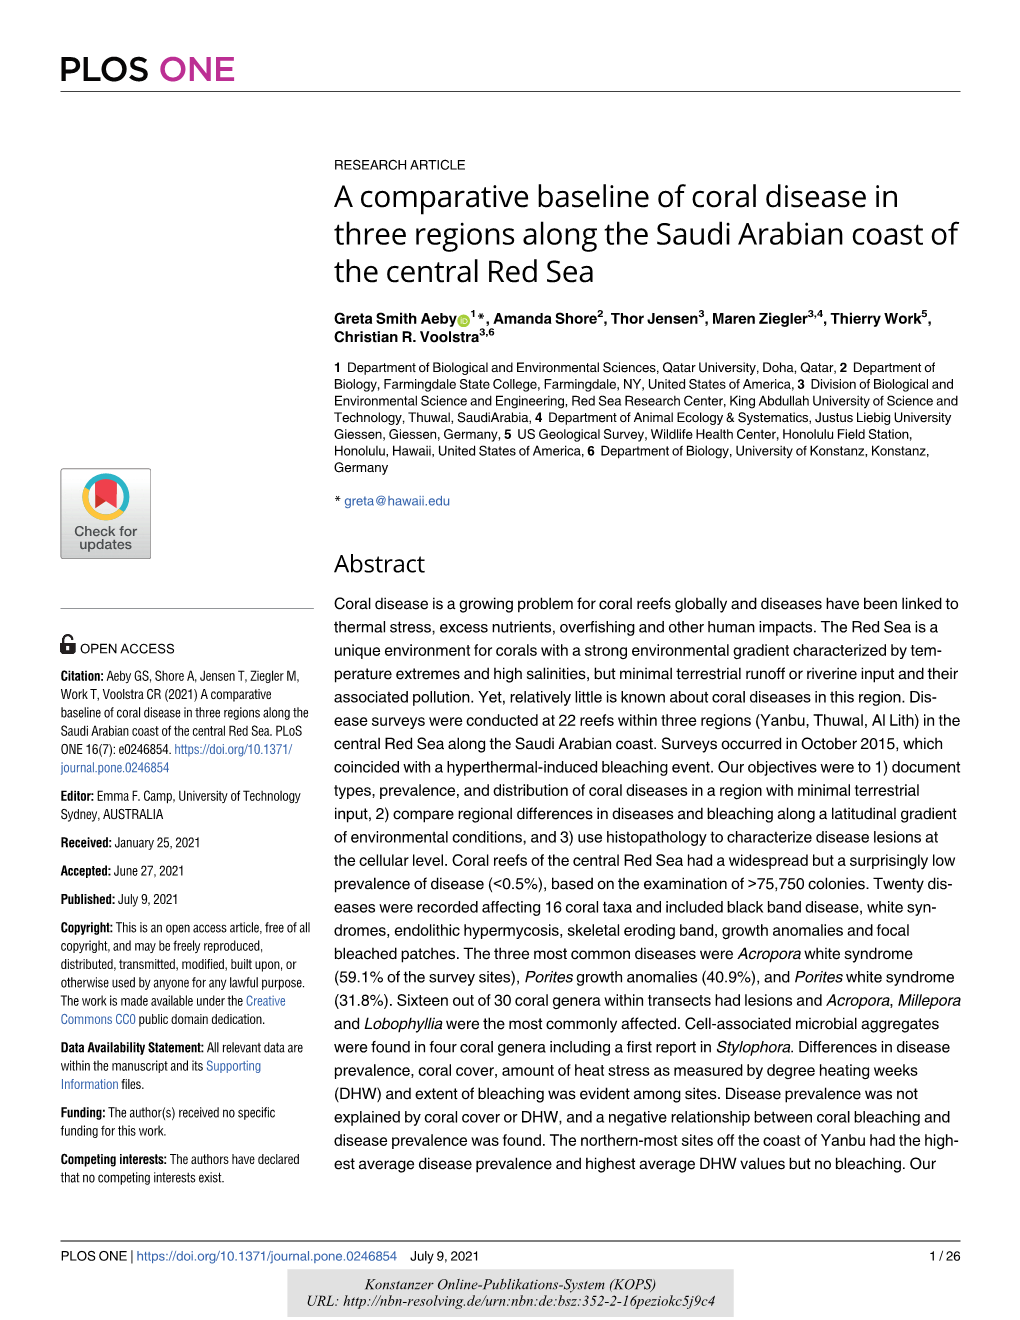 A Comparative Baseline of Coral Disease in Three Regions Along the Saudi Arabian Coast of the Central Red Sea